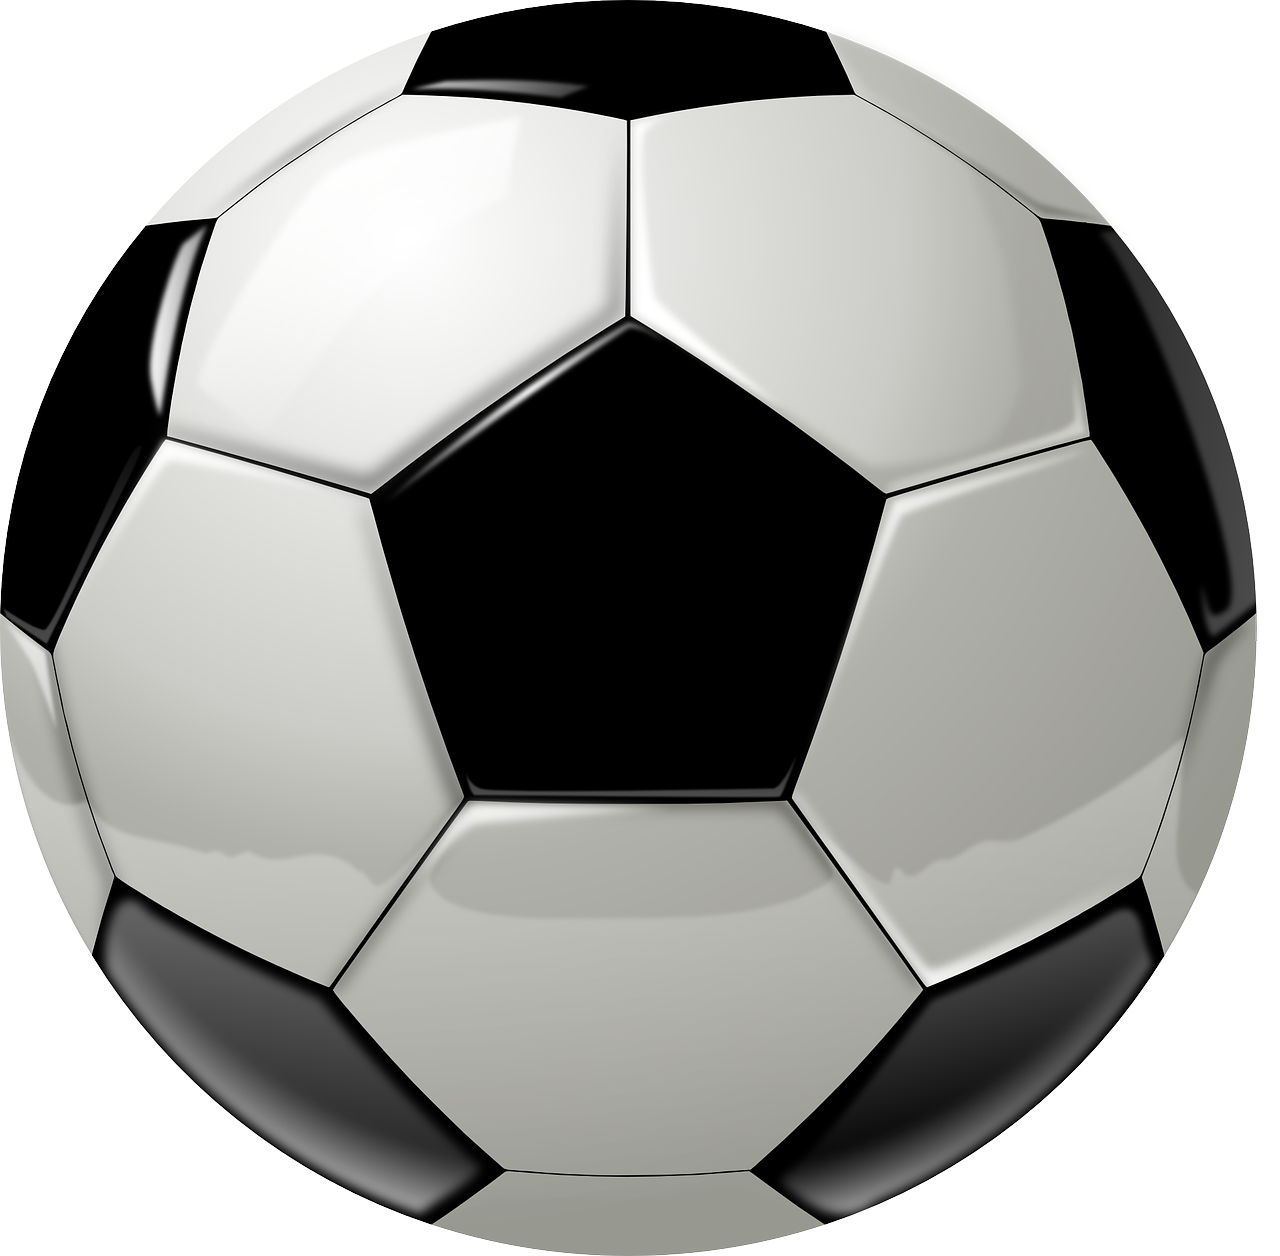 Soccer_1495078123.png - Fussball, Transparent background PNG HD thumbnail